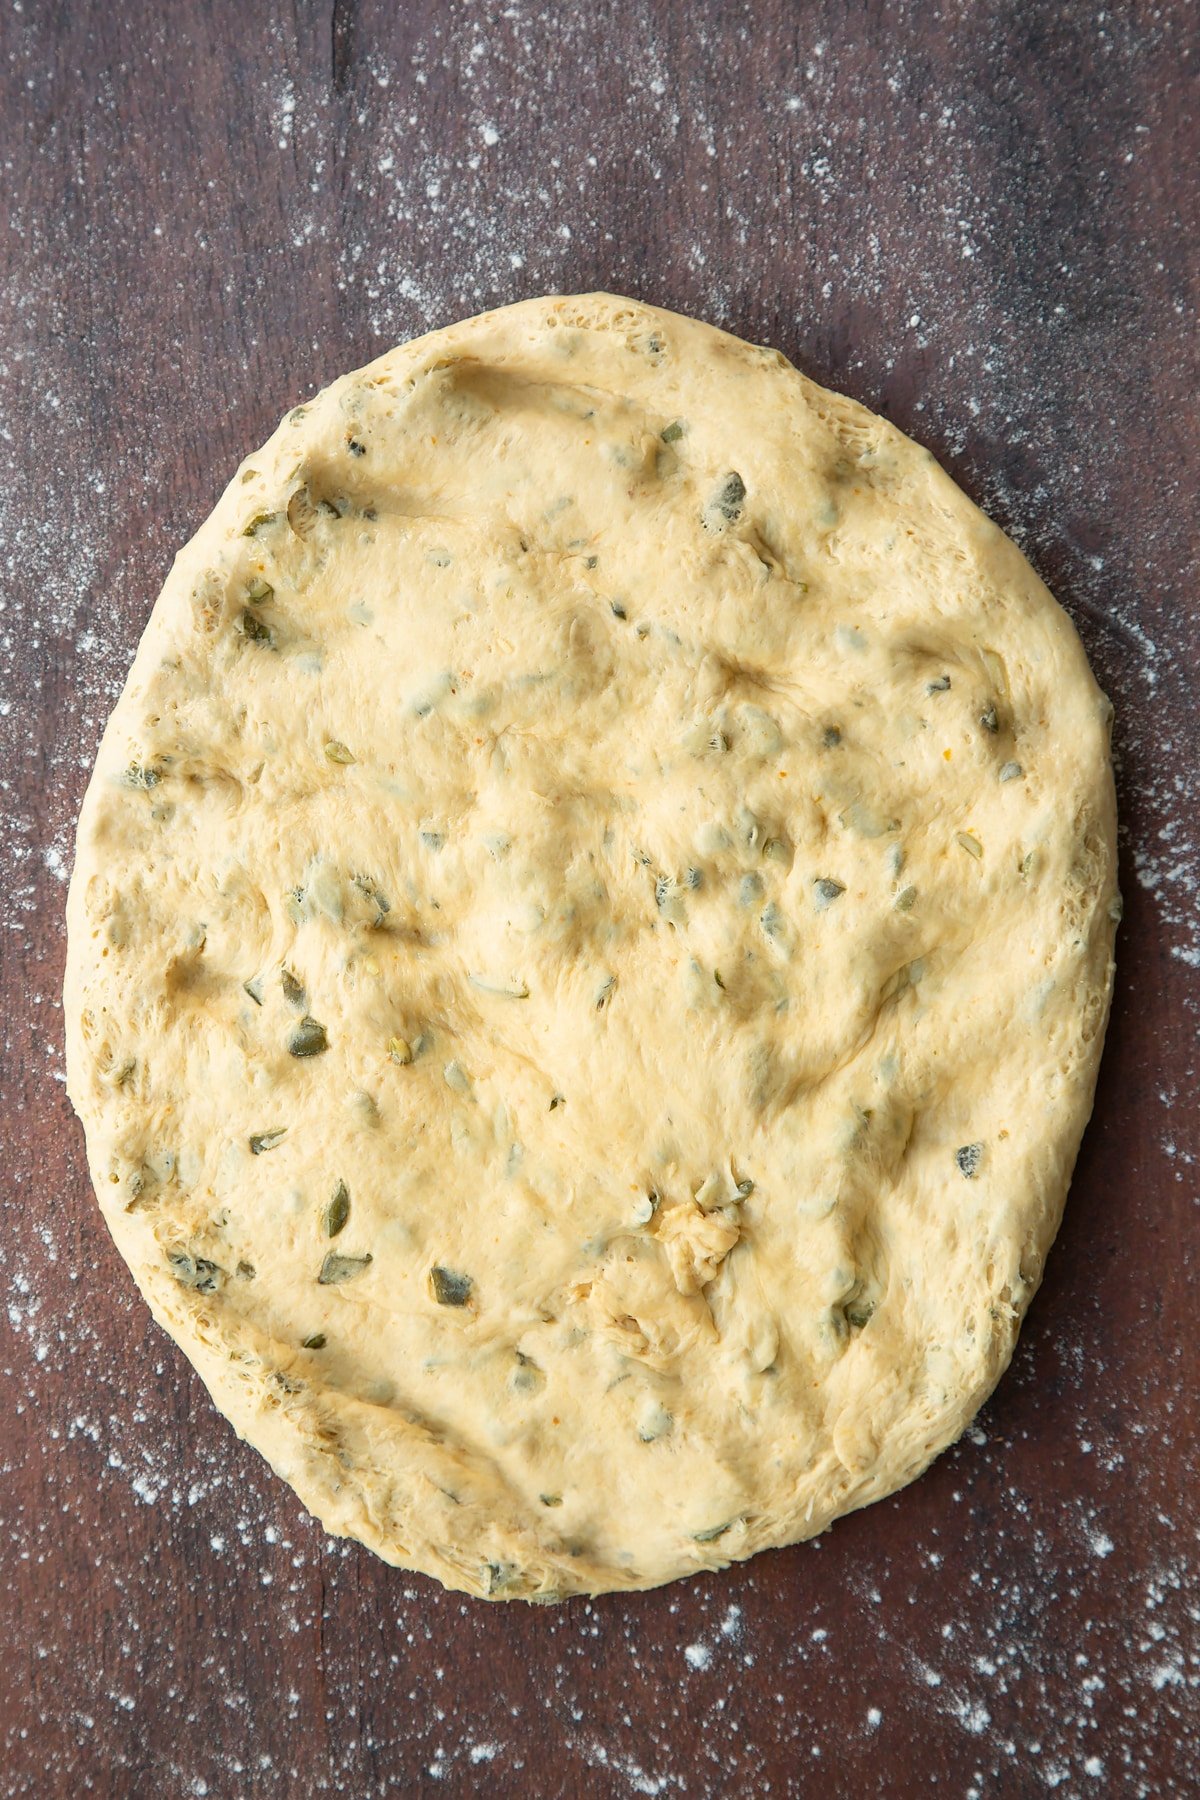 Pumpkin seed specie dough pressed into a unappetizing oval on a floured surface.